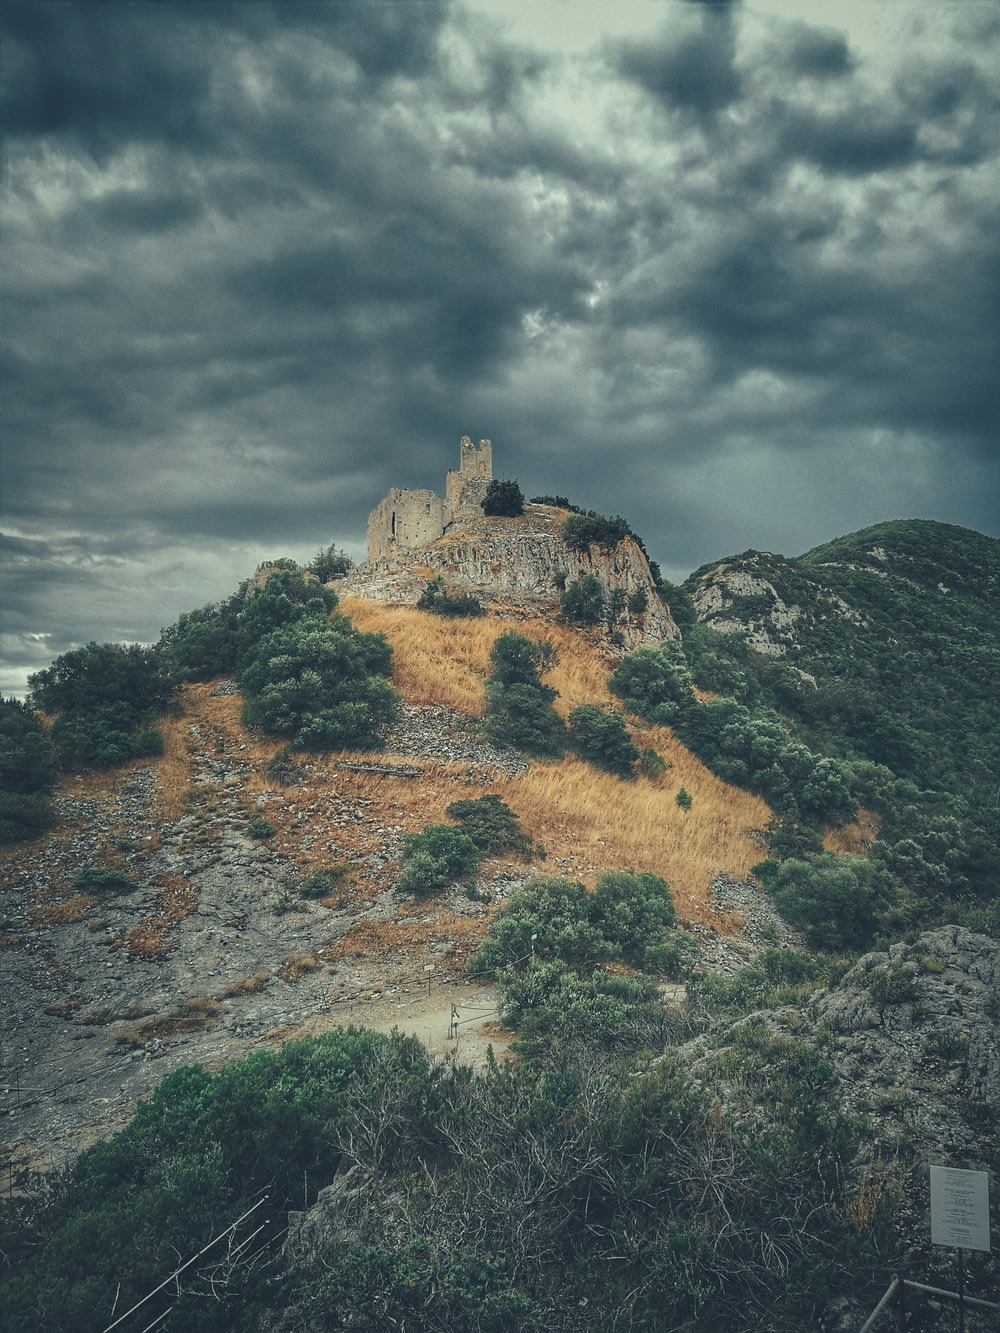 a castle sitting on top of a hill under a cloudy sky